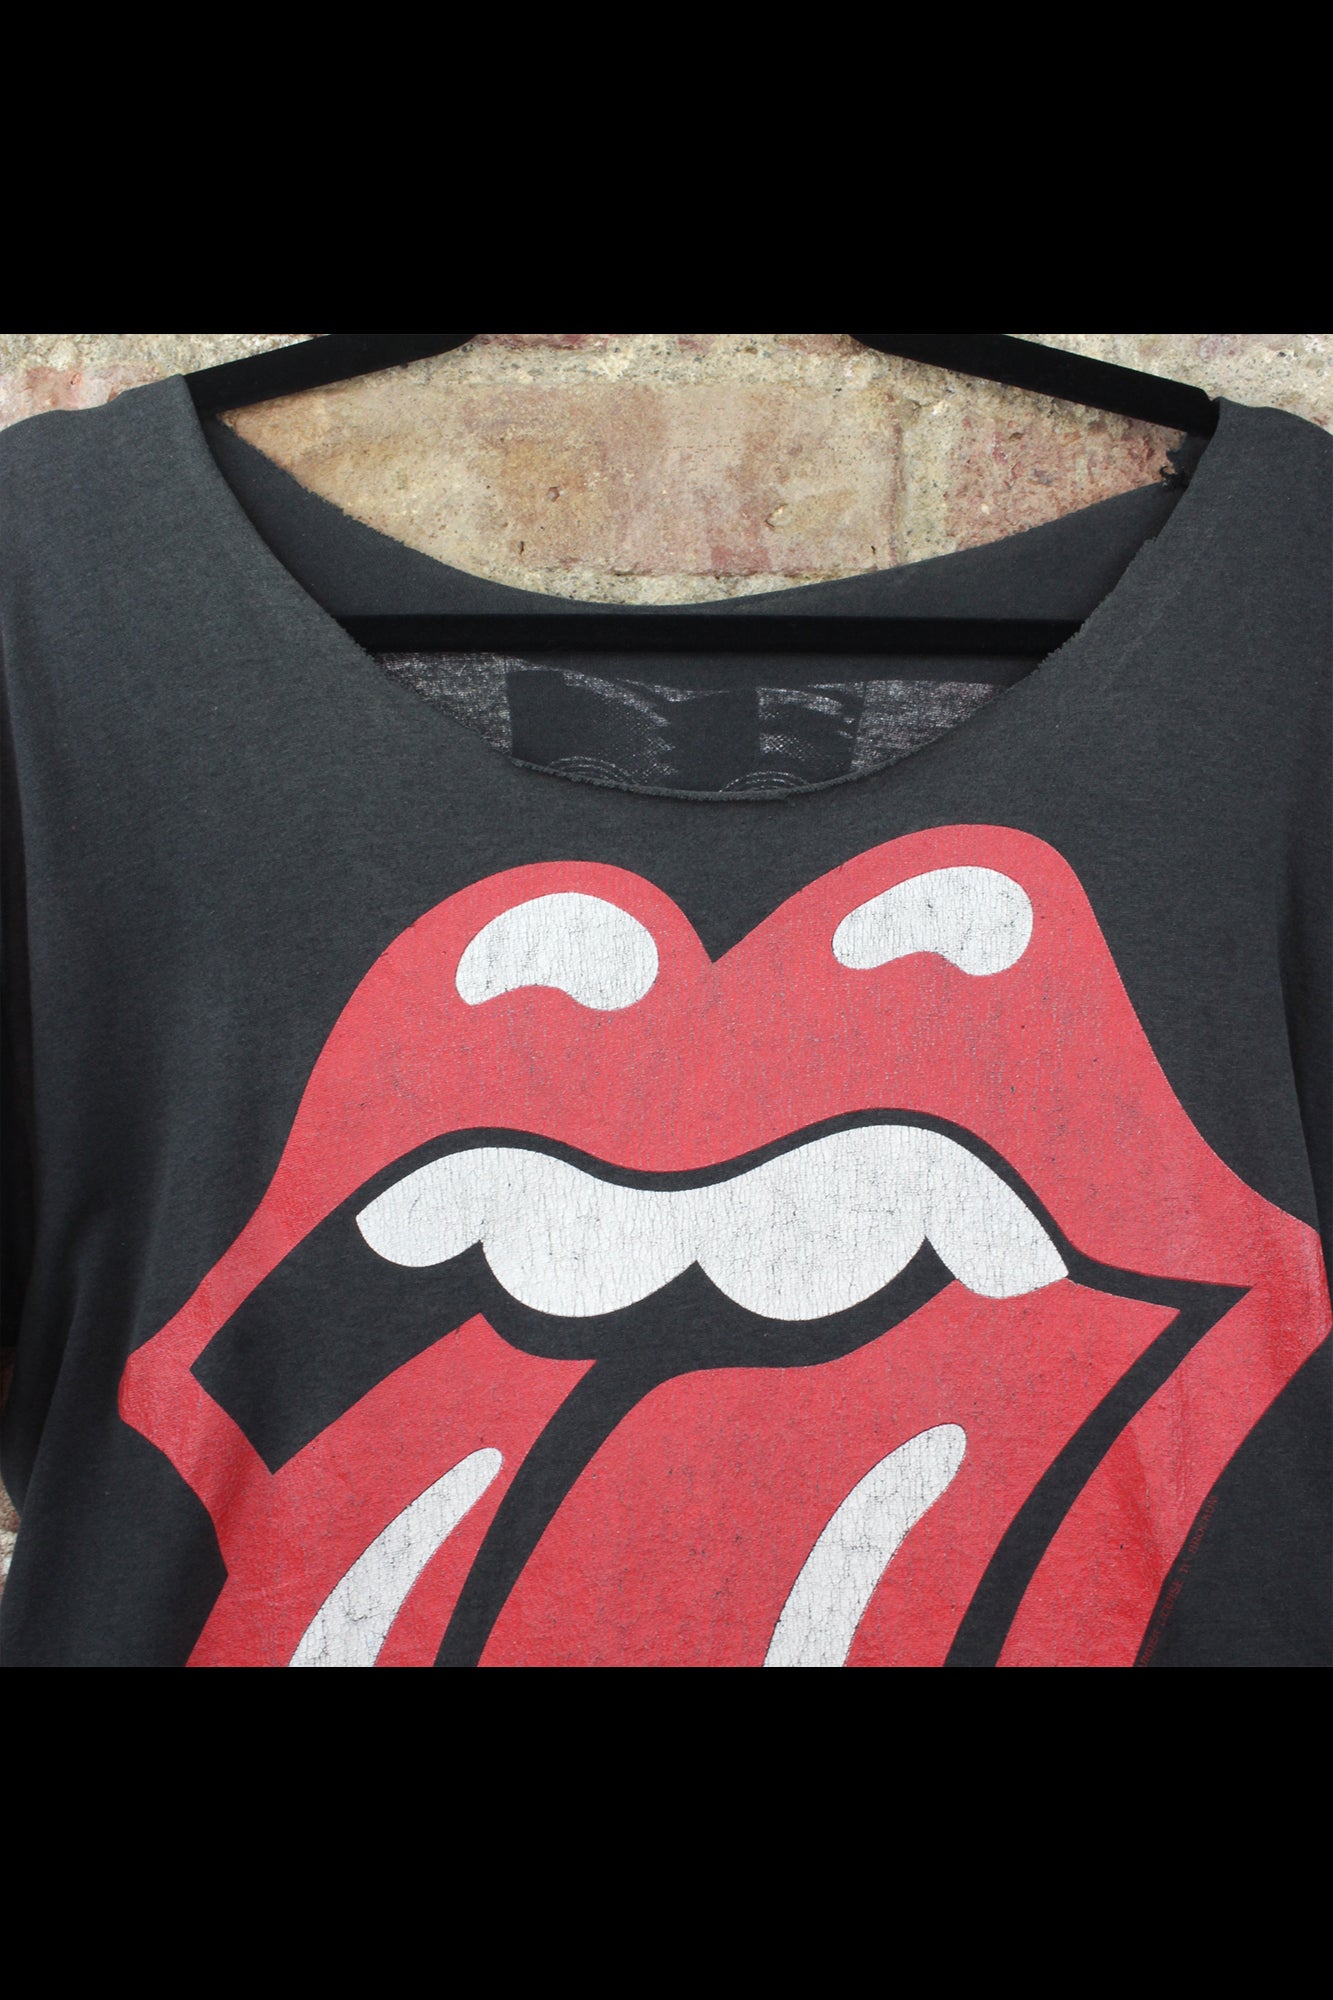 989 "Rolling Stones" Tee - Small